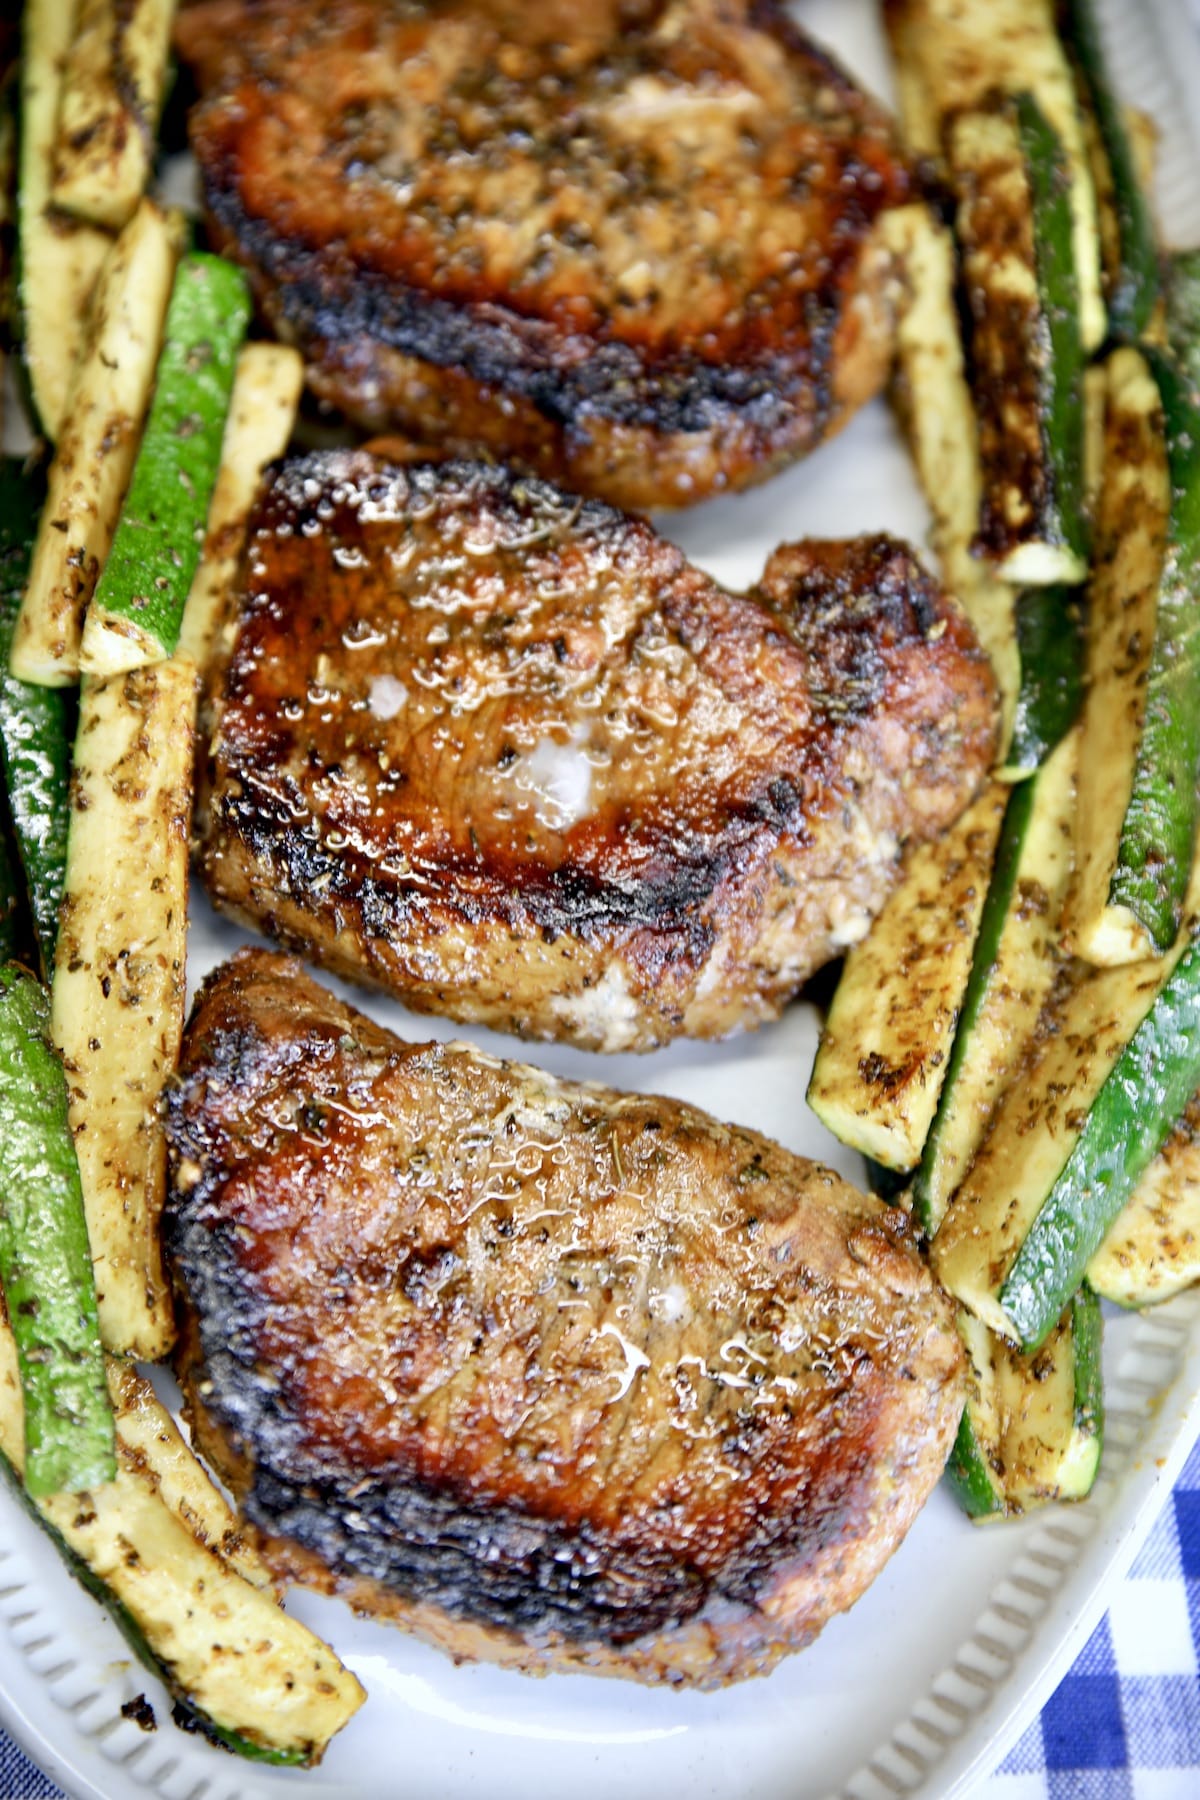 Grilled pork chops on a platter with zucchini.